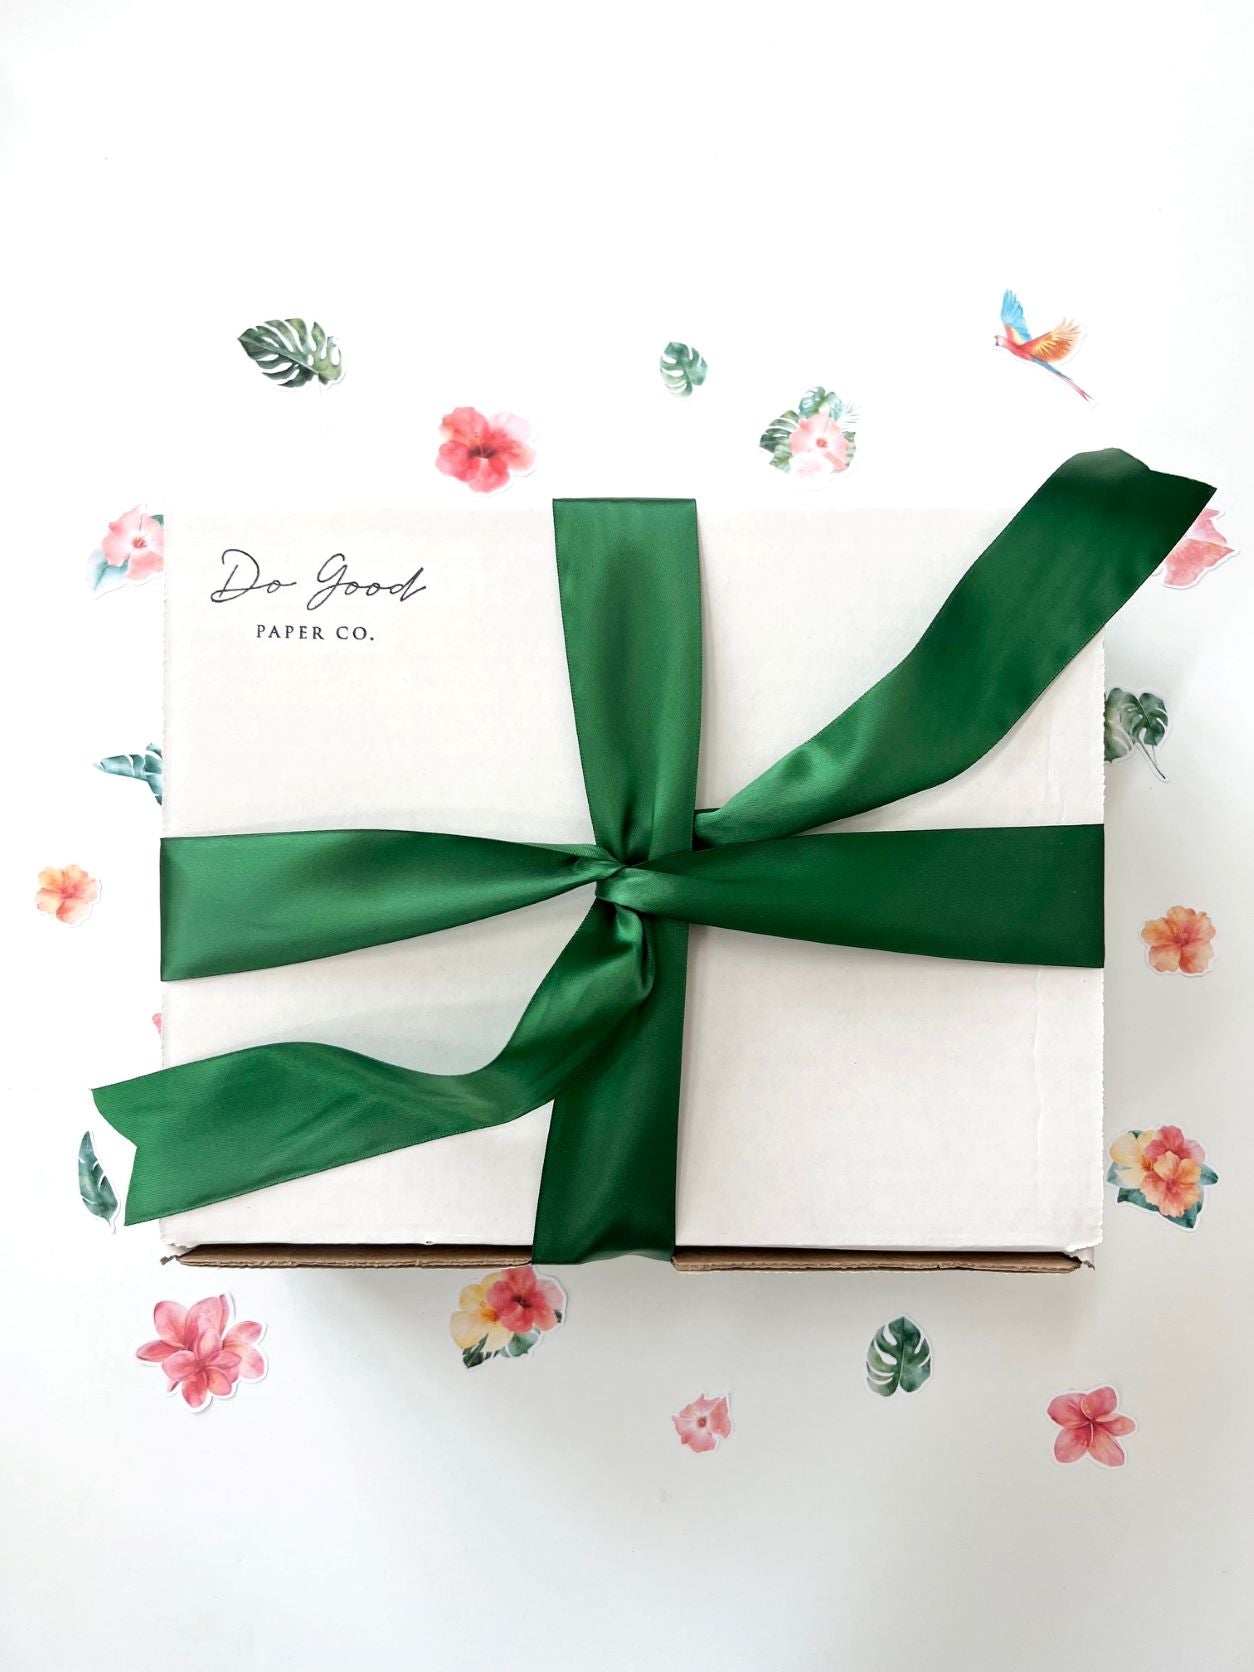 Tropical themed stationery subscription box